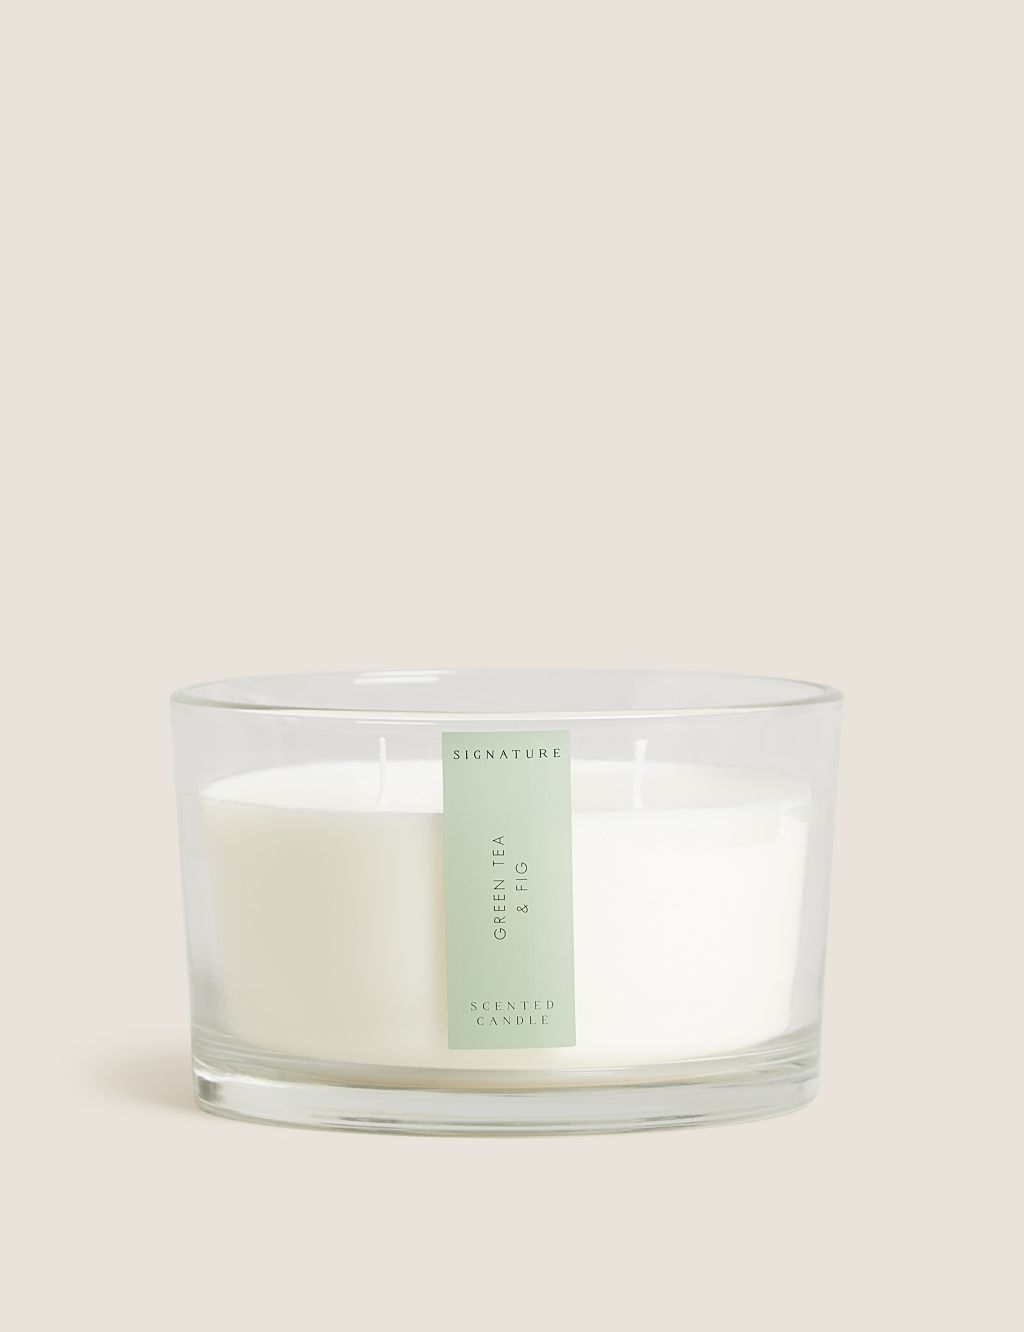 Green Tea & Fig 3 Wick Candle image 1